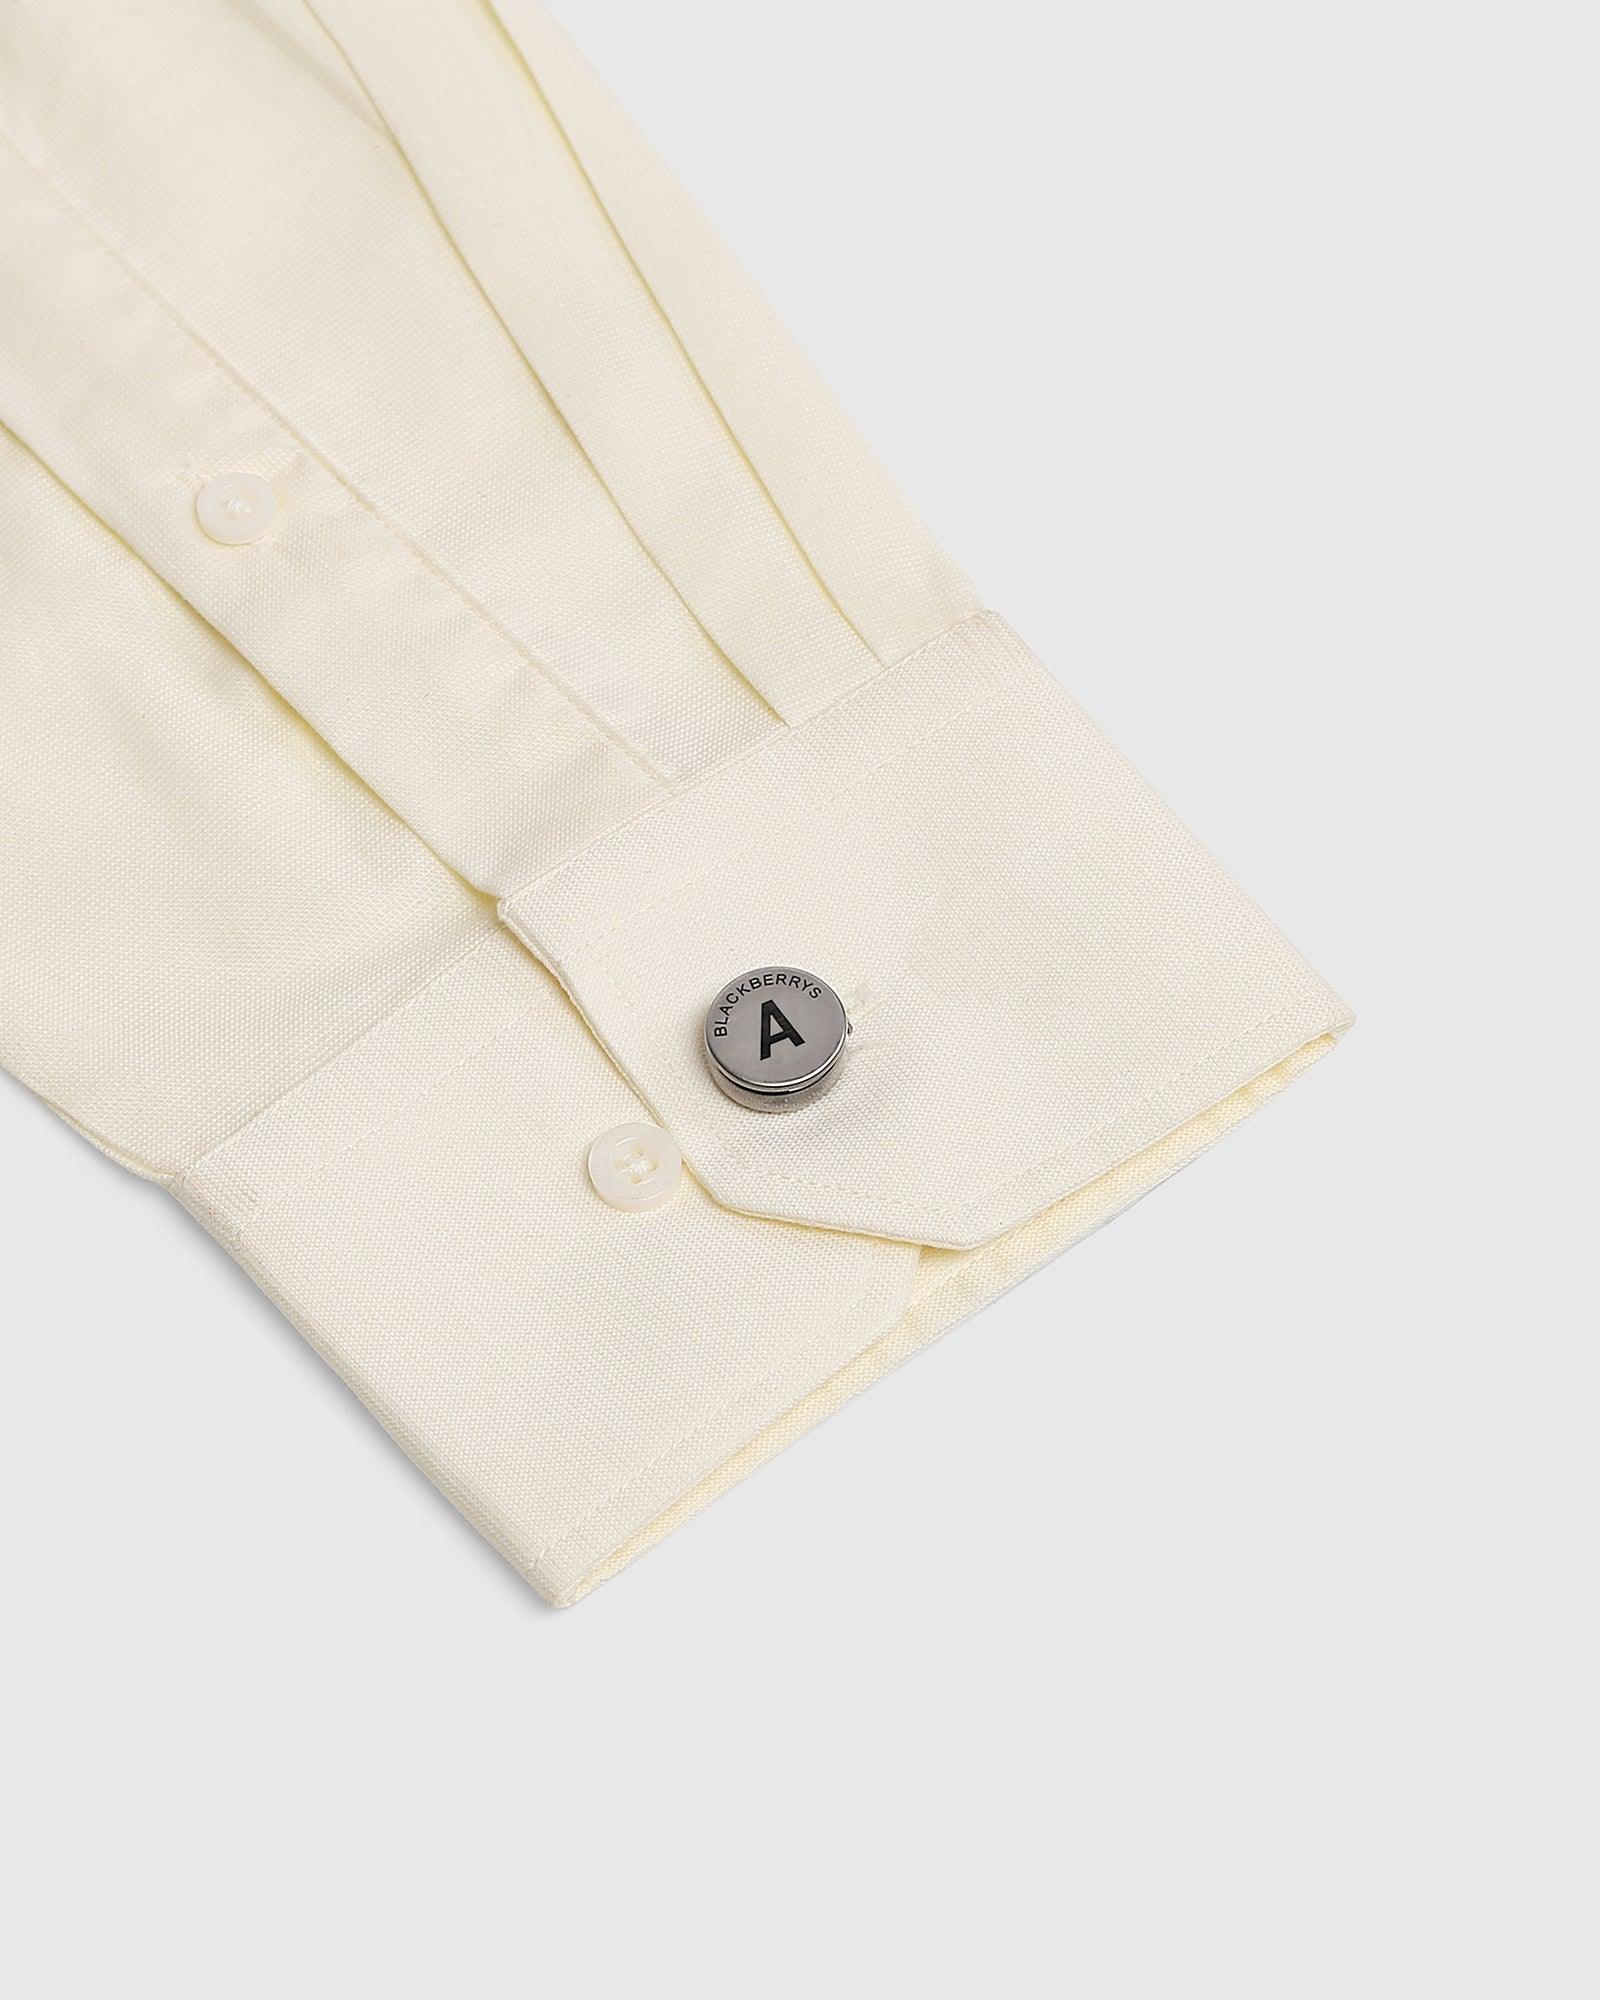 Personalised Shirt Button Cover With Alphabetic Initial-A